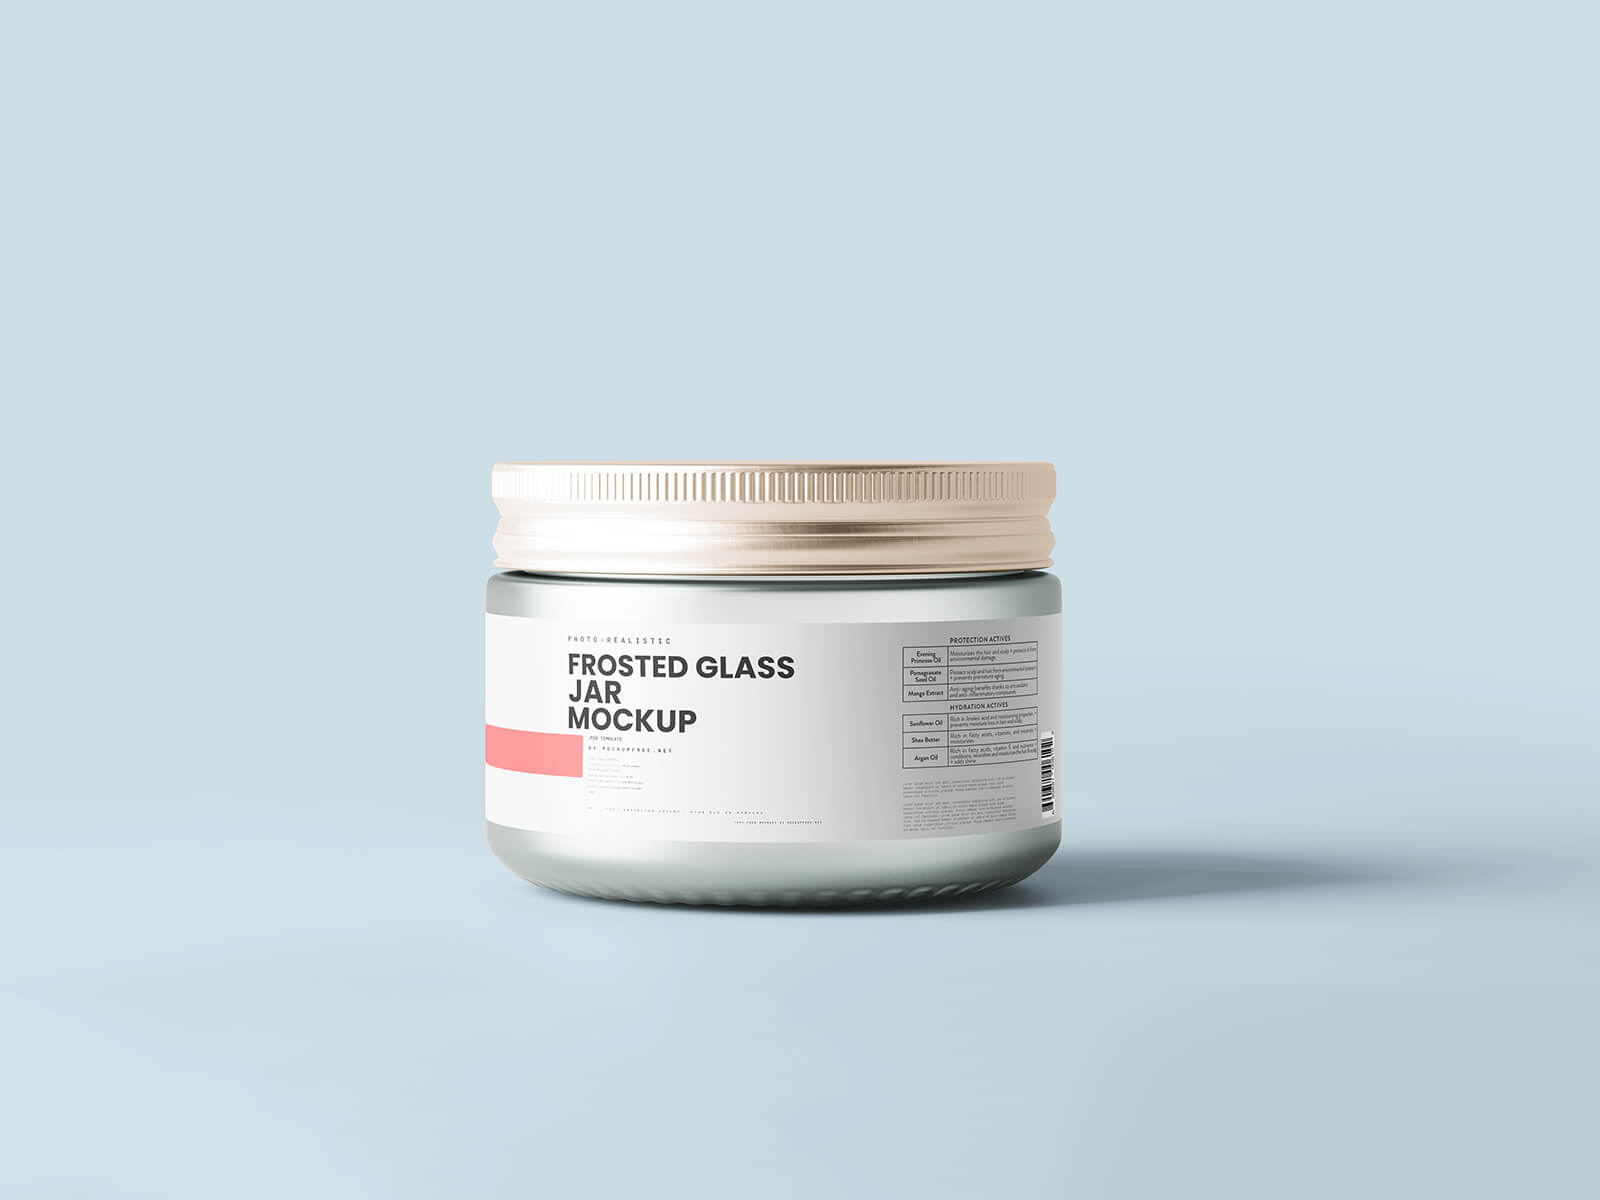 Free Cosmetic Frosted Glass Jar Mockup PSD